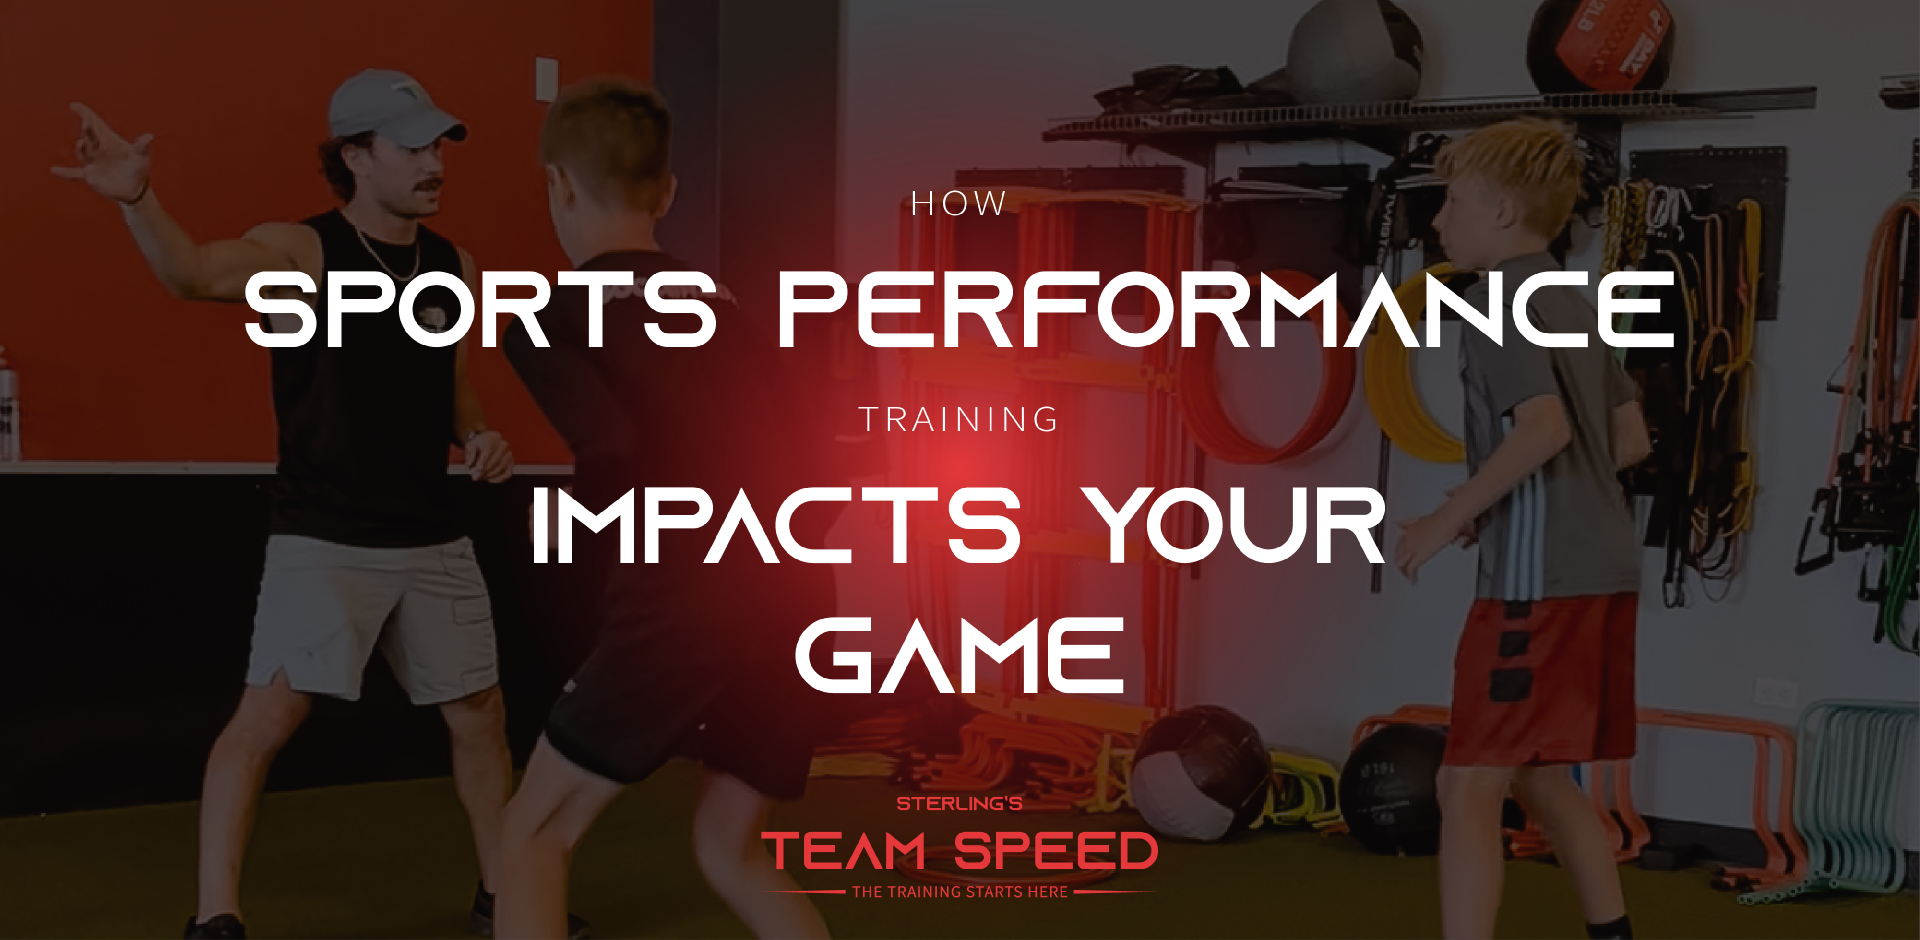 
How Sports Performance Training Impacts Your Game